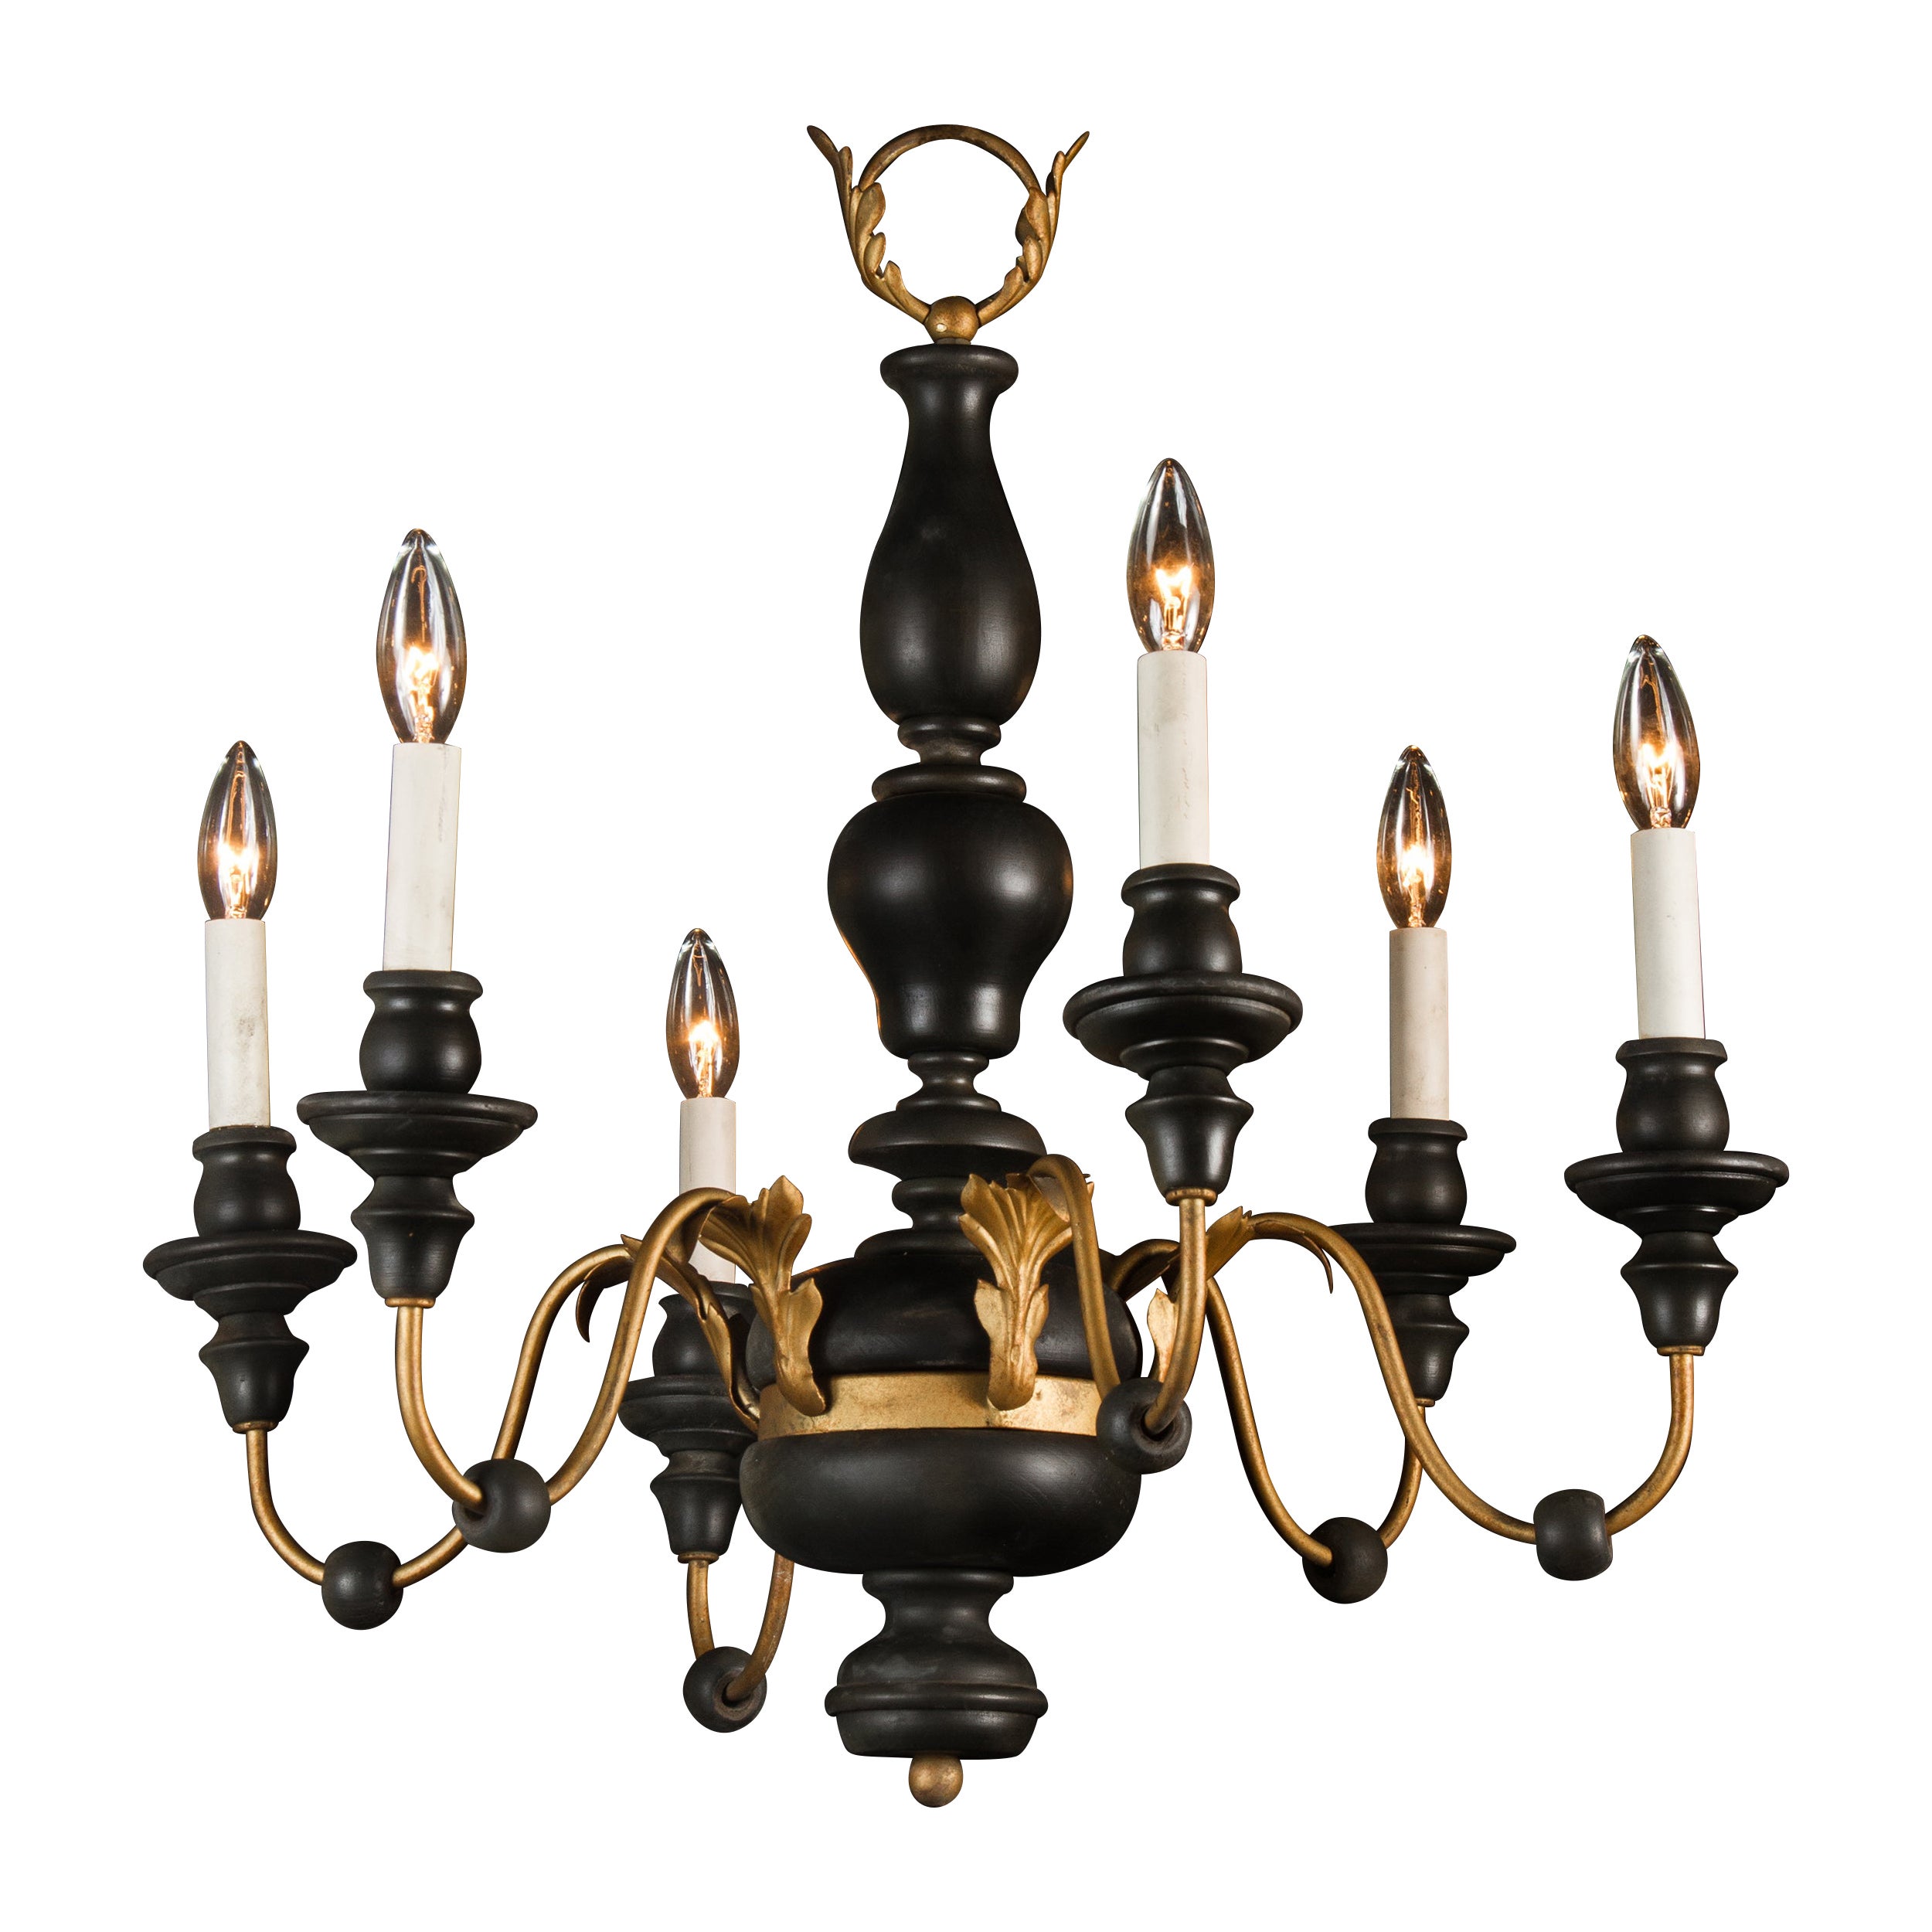 Black and Gold Wood Chandelier with Iron and Tole, Italian Mid-20th Century